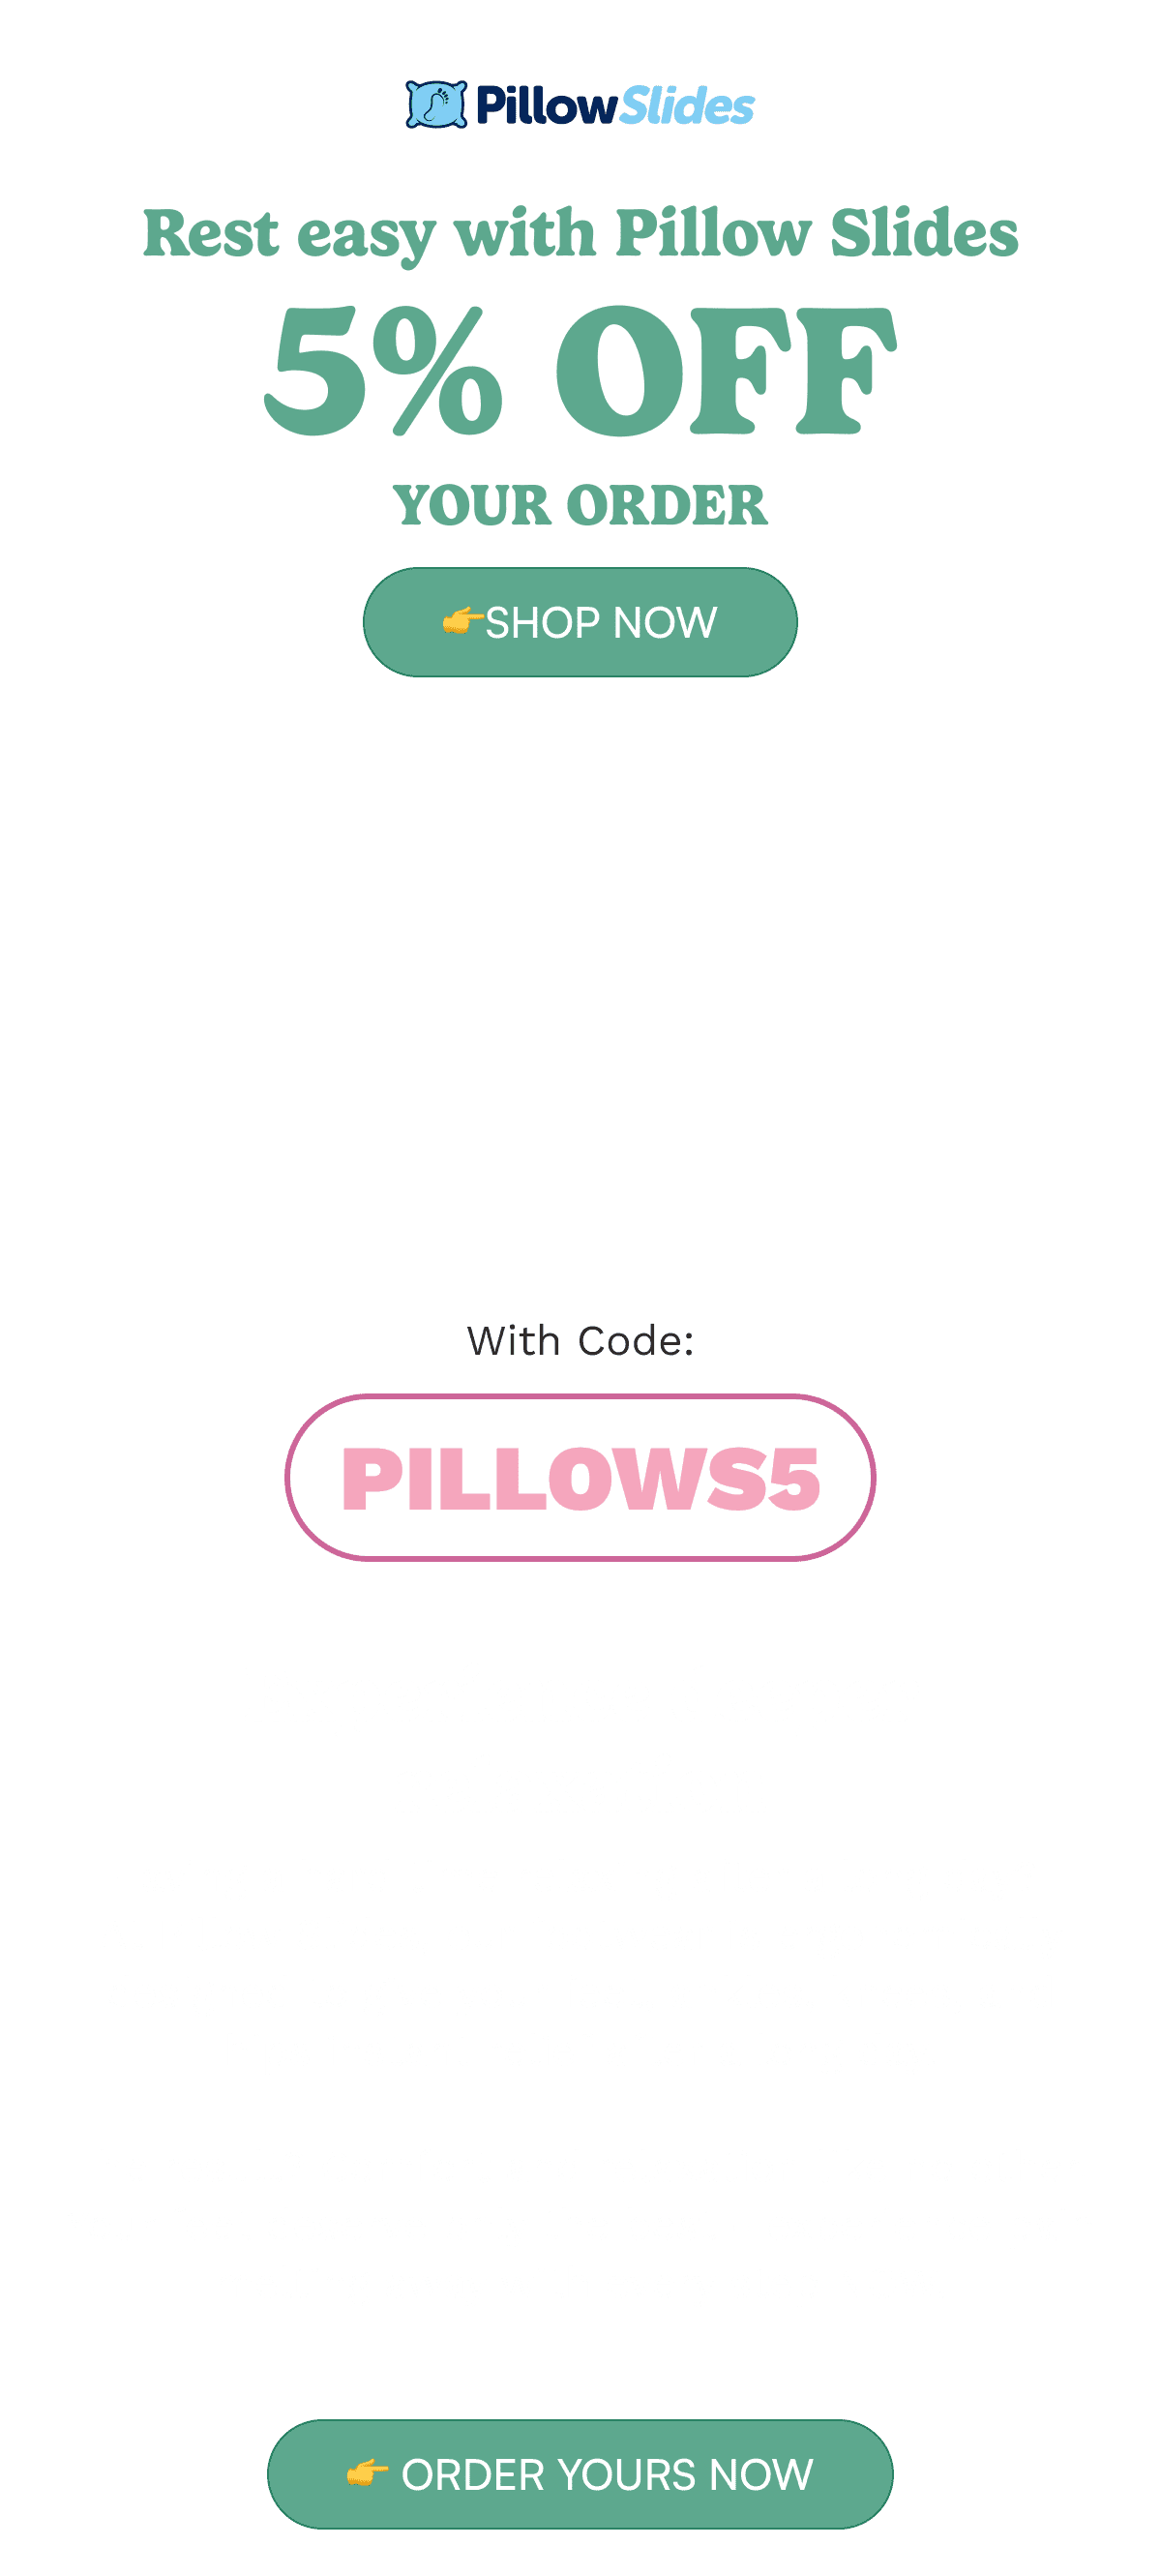 IZIPillowSlicles Rest easy with Pillow Slides 5% OFF YOUR ORDER SHOP NOW With Code: ORDER YOURS NOW 